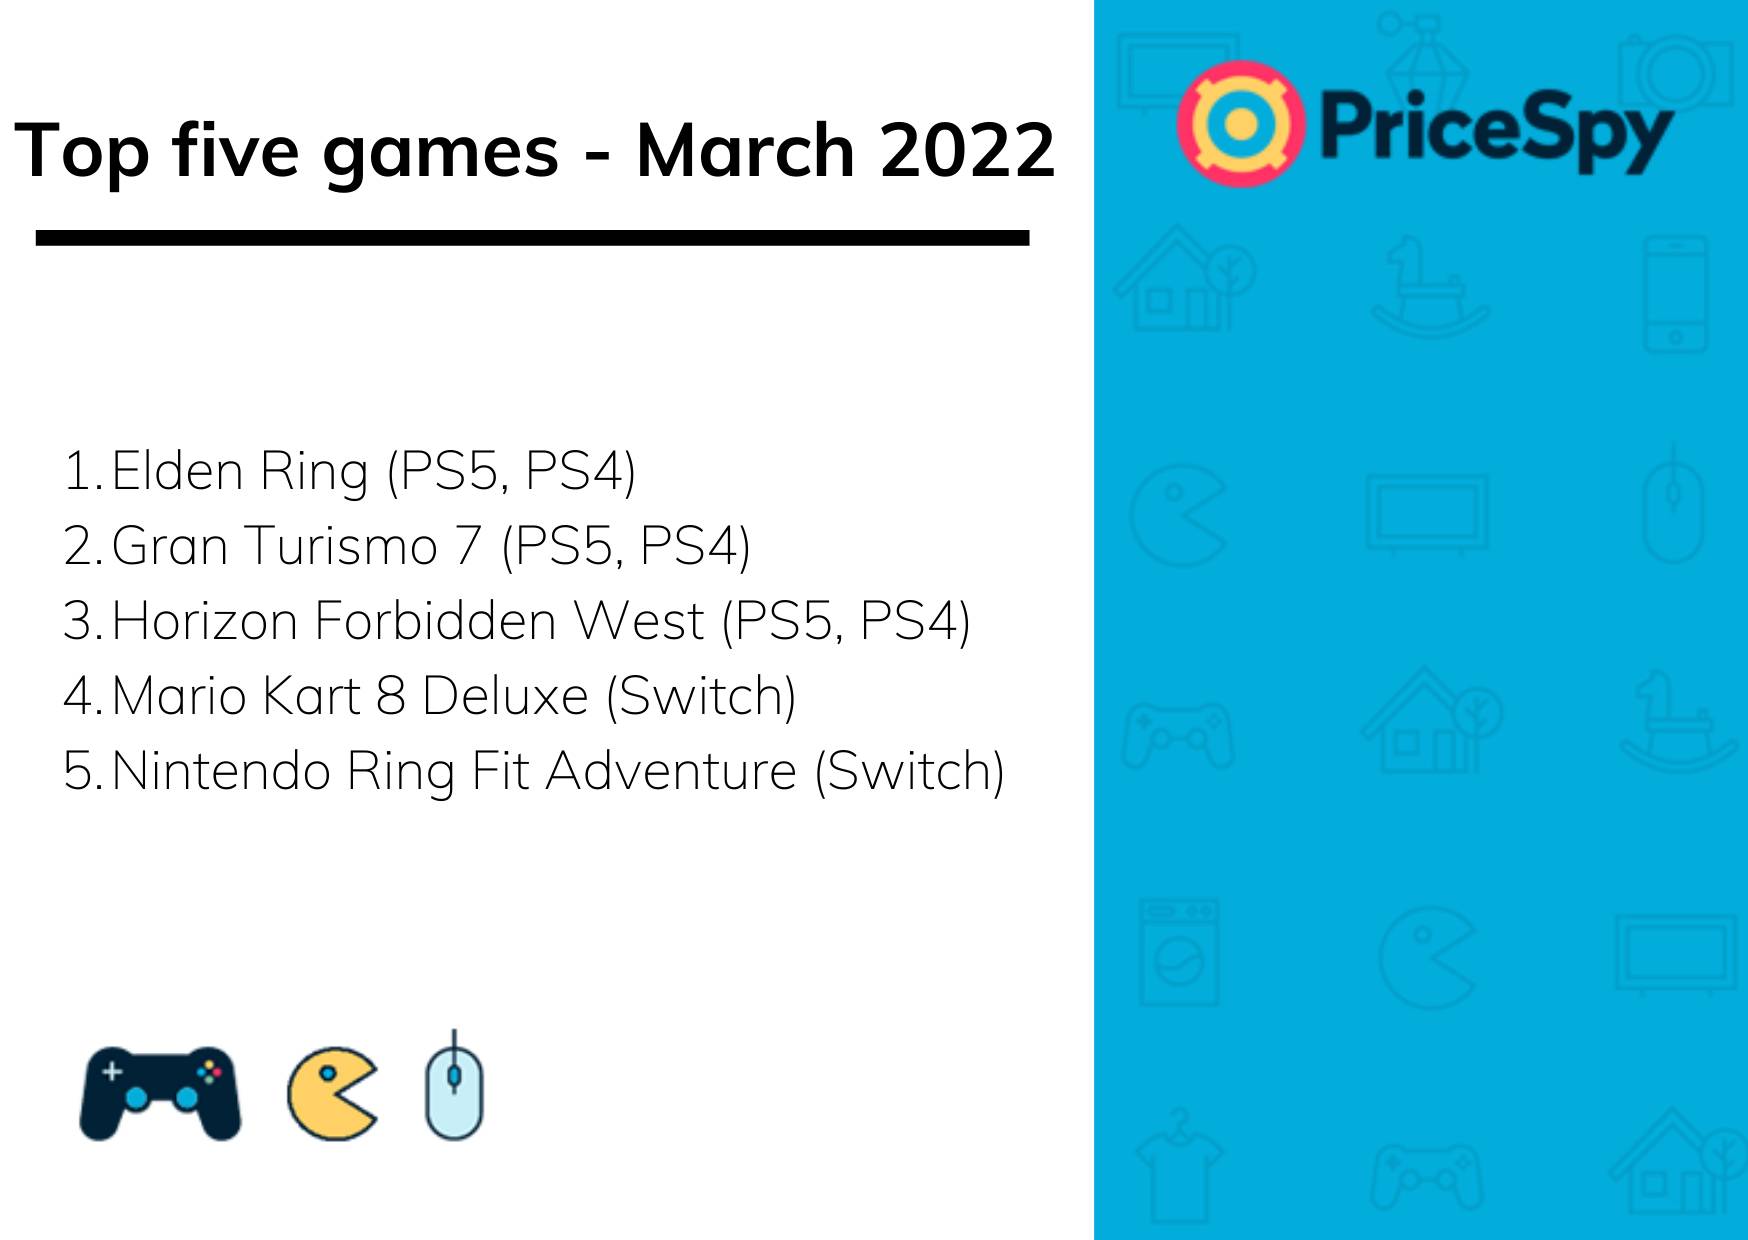 Top five games - March 2022 Pricespy